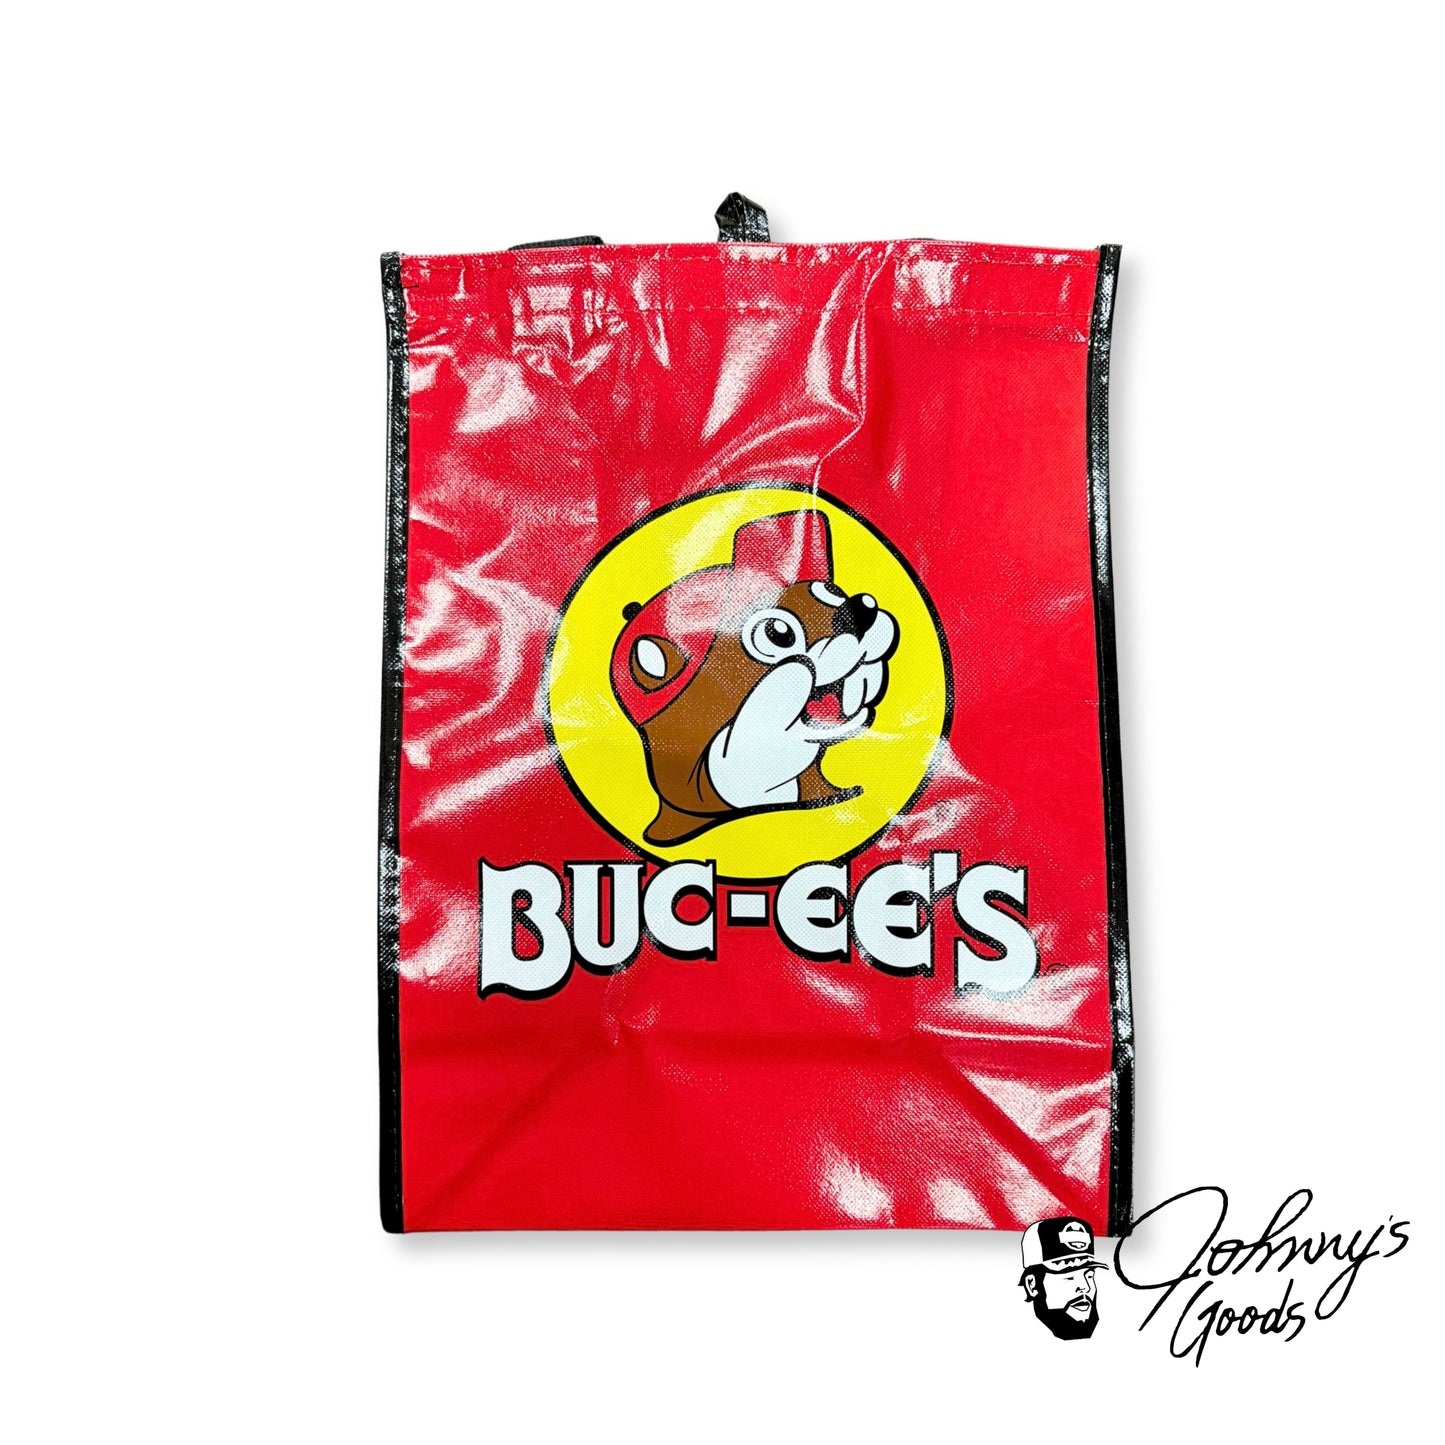 Buc-ee's Bags buc ees buc ee's bucees buccees buc-ees